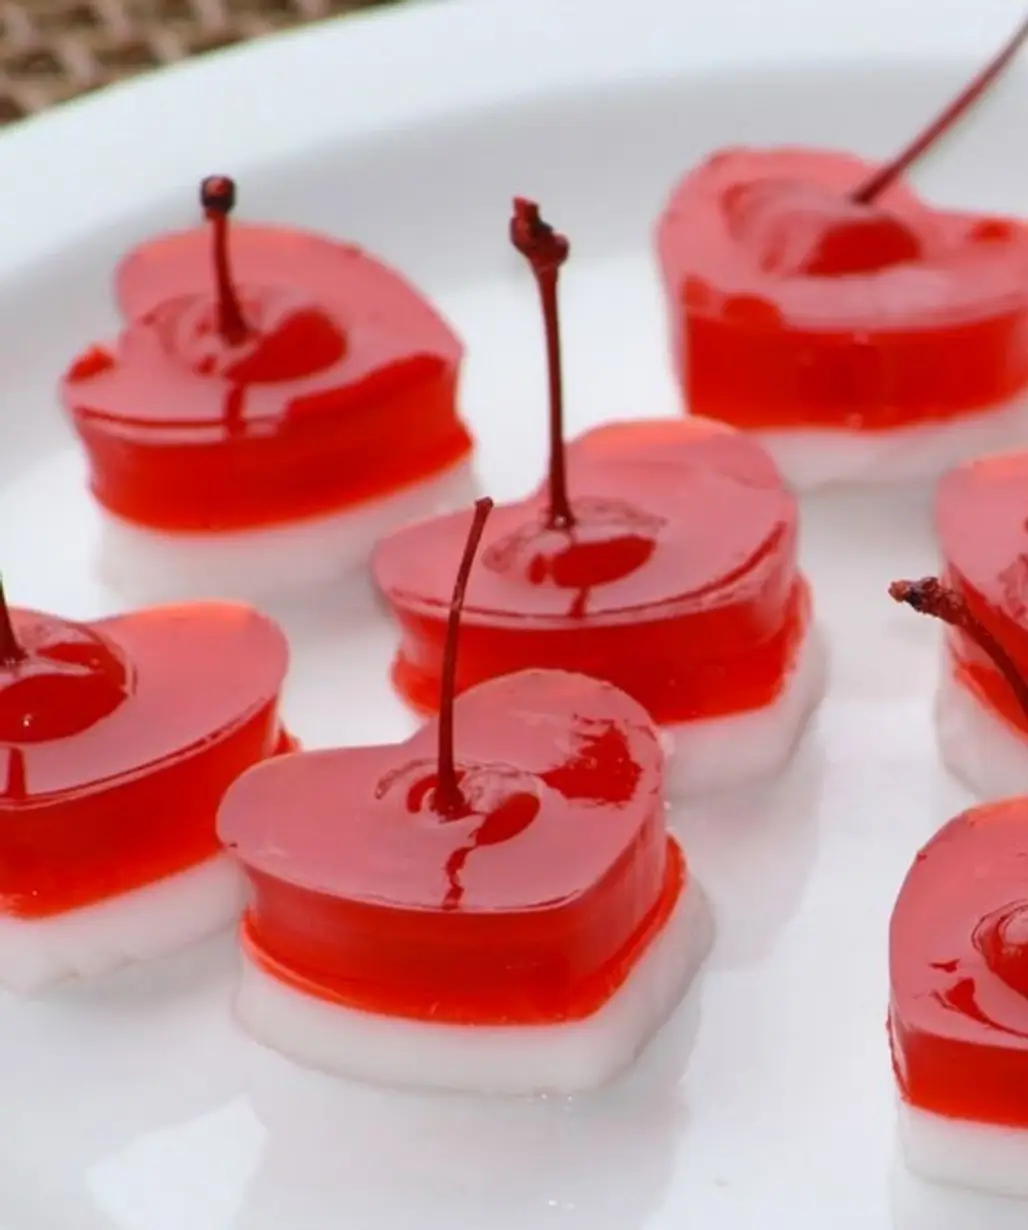 Heart-shaped Jell-O Shots with Cherries